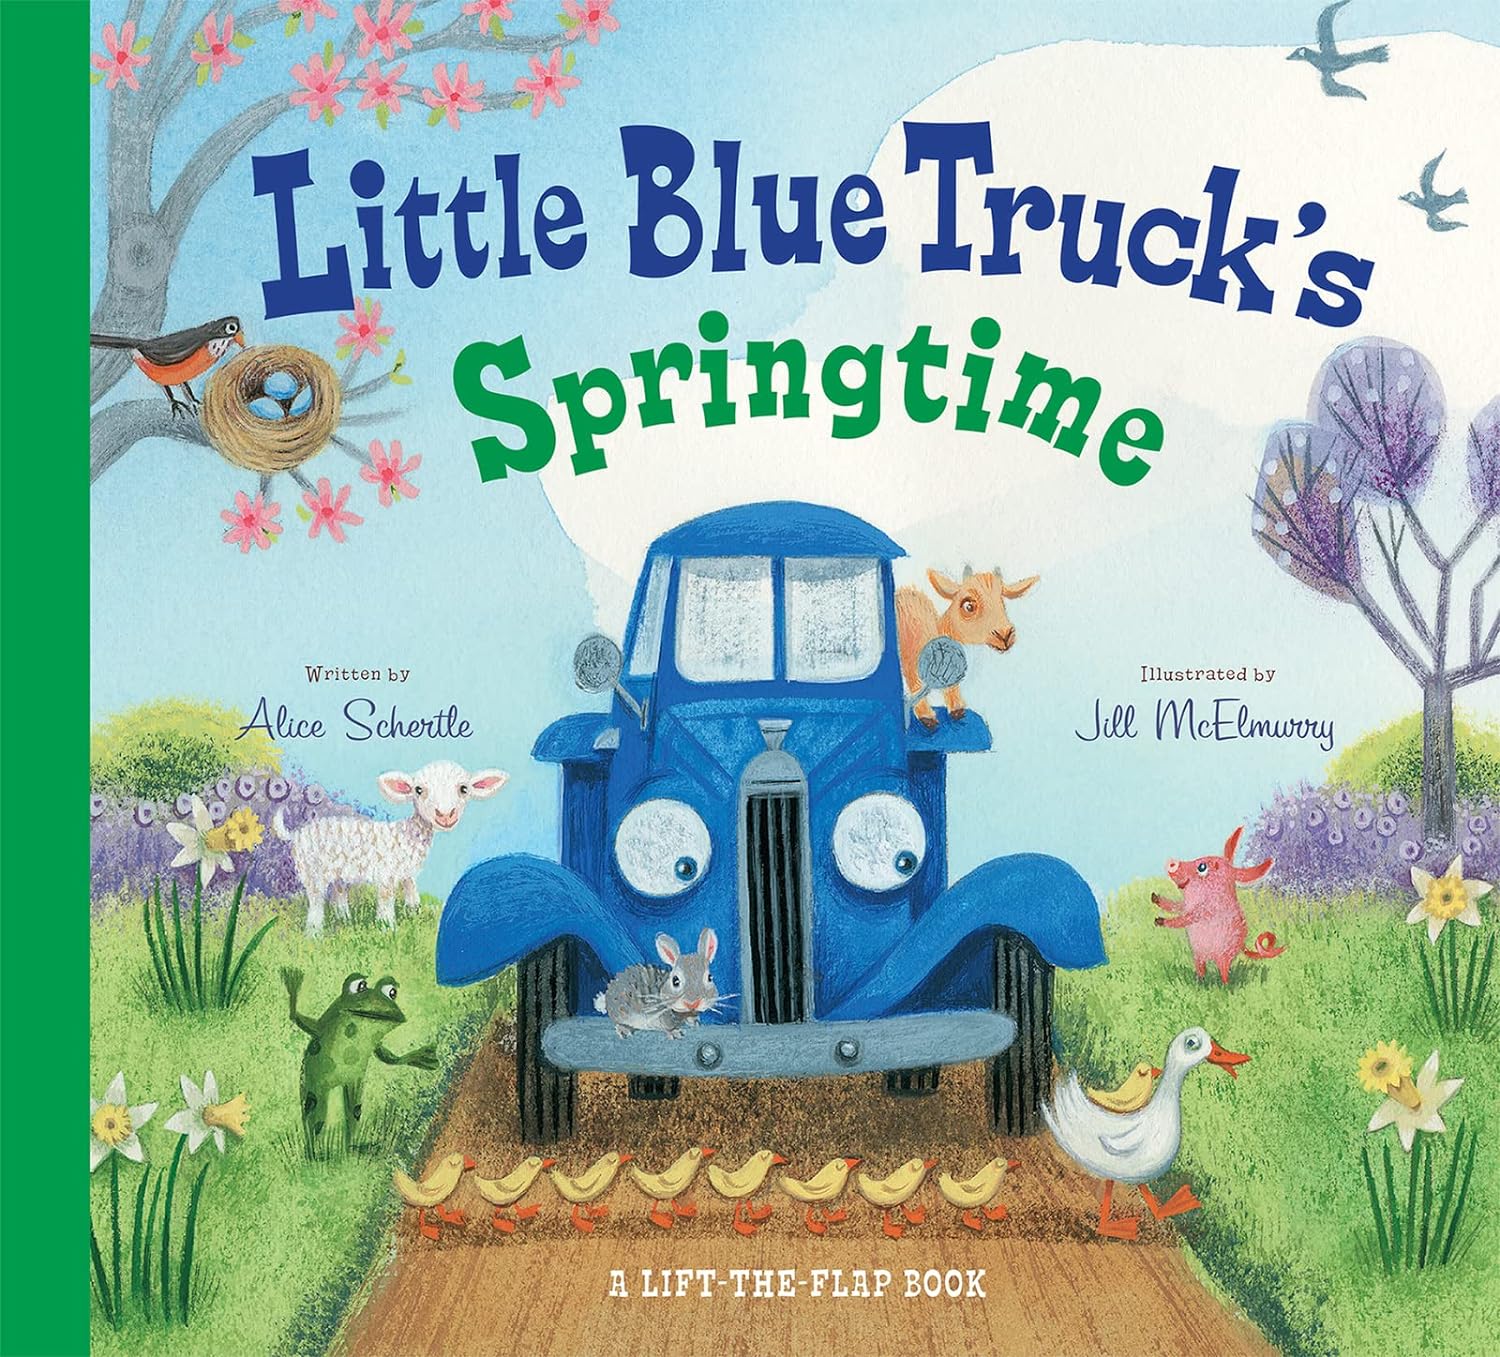 Generic ‘Little Blue Truck’s Springtime’ by Alice Schertle, illustrated by Jill McElmurry